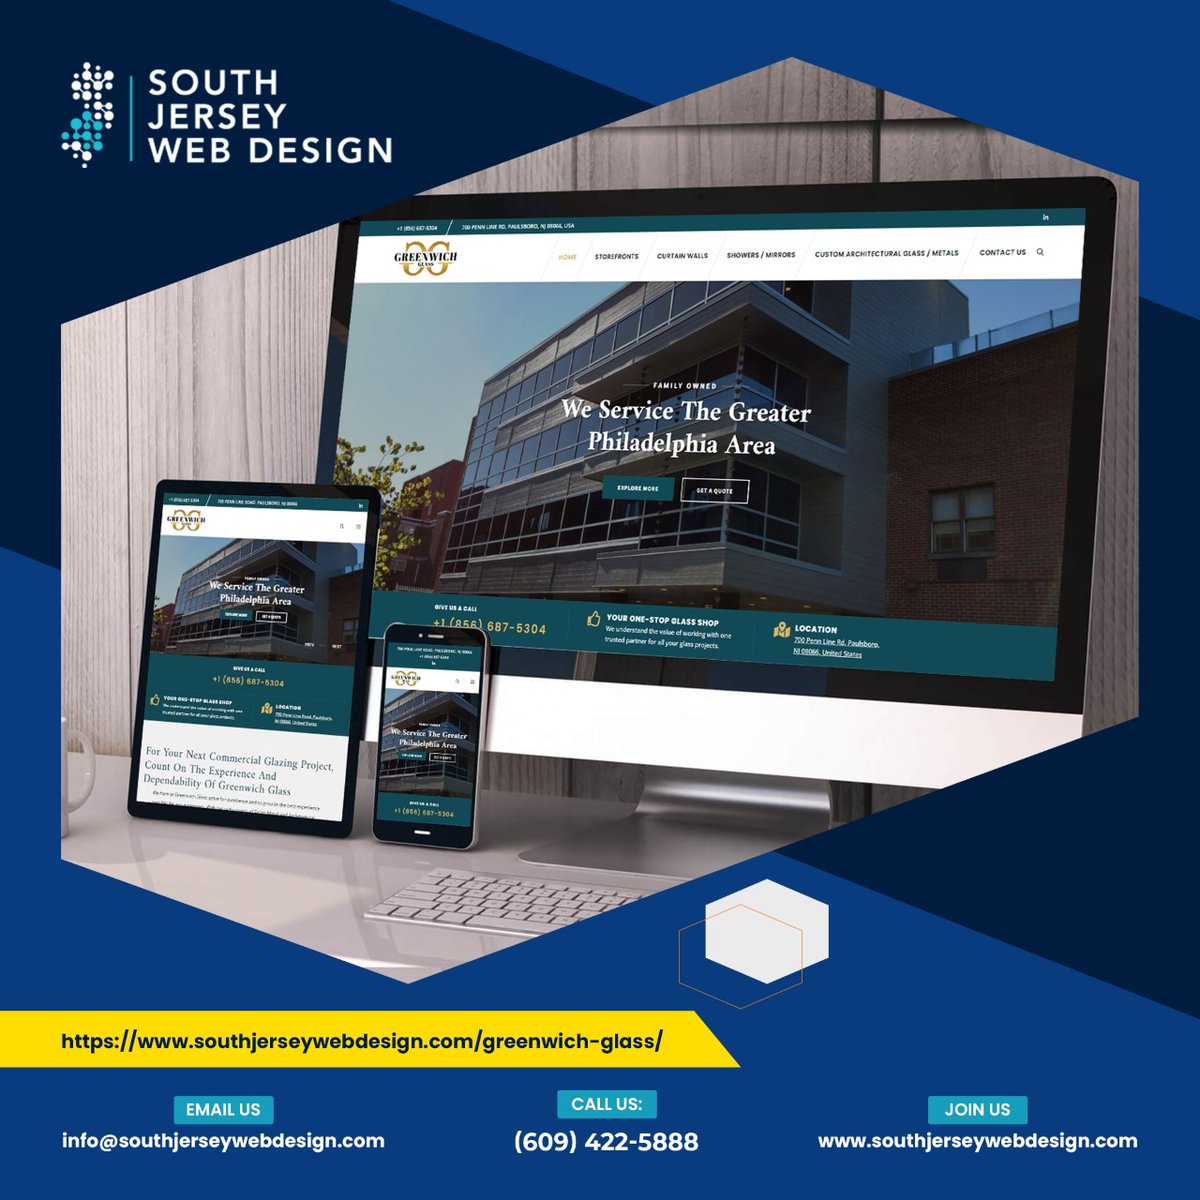 Check out the newly launched website for Greenwich Glass Company, designed by our expert team at @jerseywebdesign!

Check it out our work portfolio 👉
southjerseywebdesign.com/portfolio/

#webdevelopment #Webdesign #NewJersey #work #webdesigner #websitesolutions